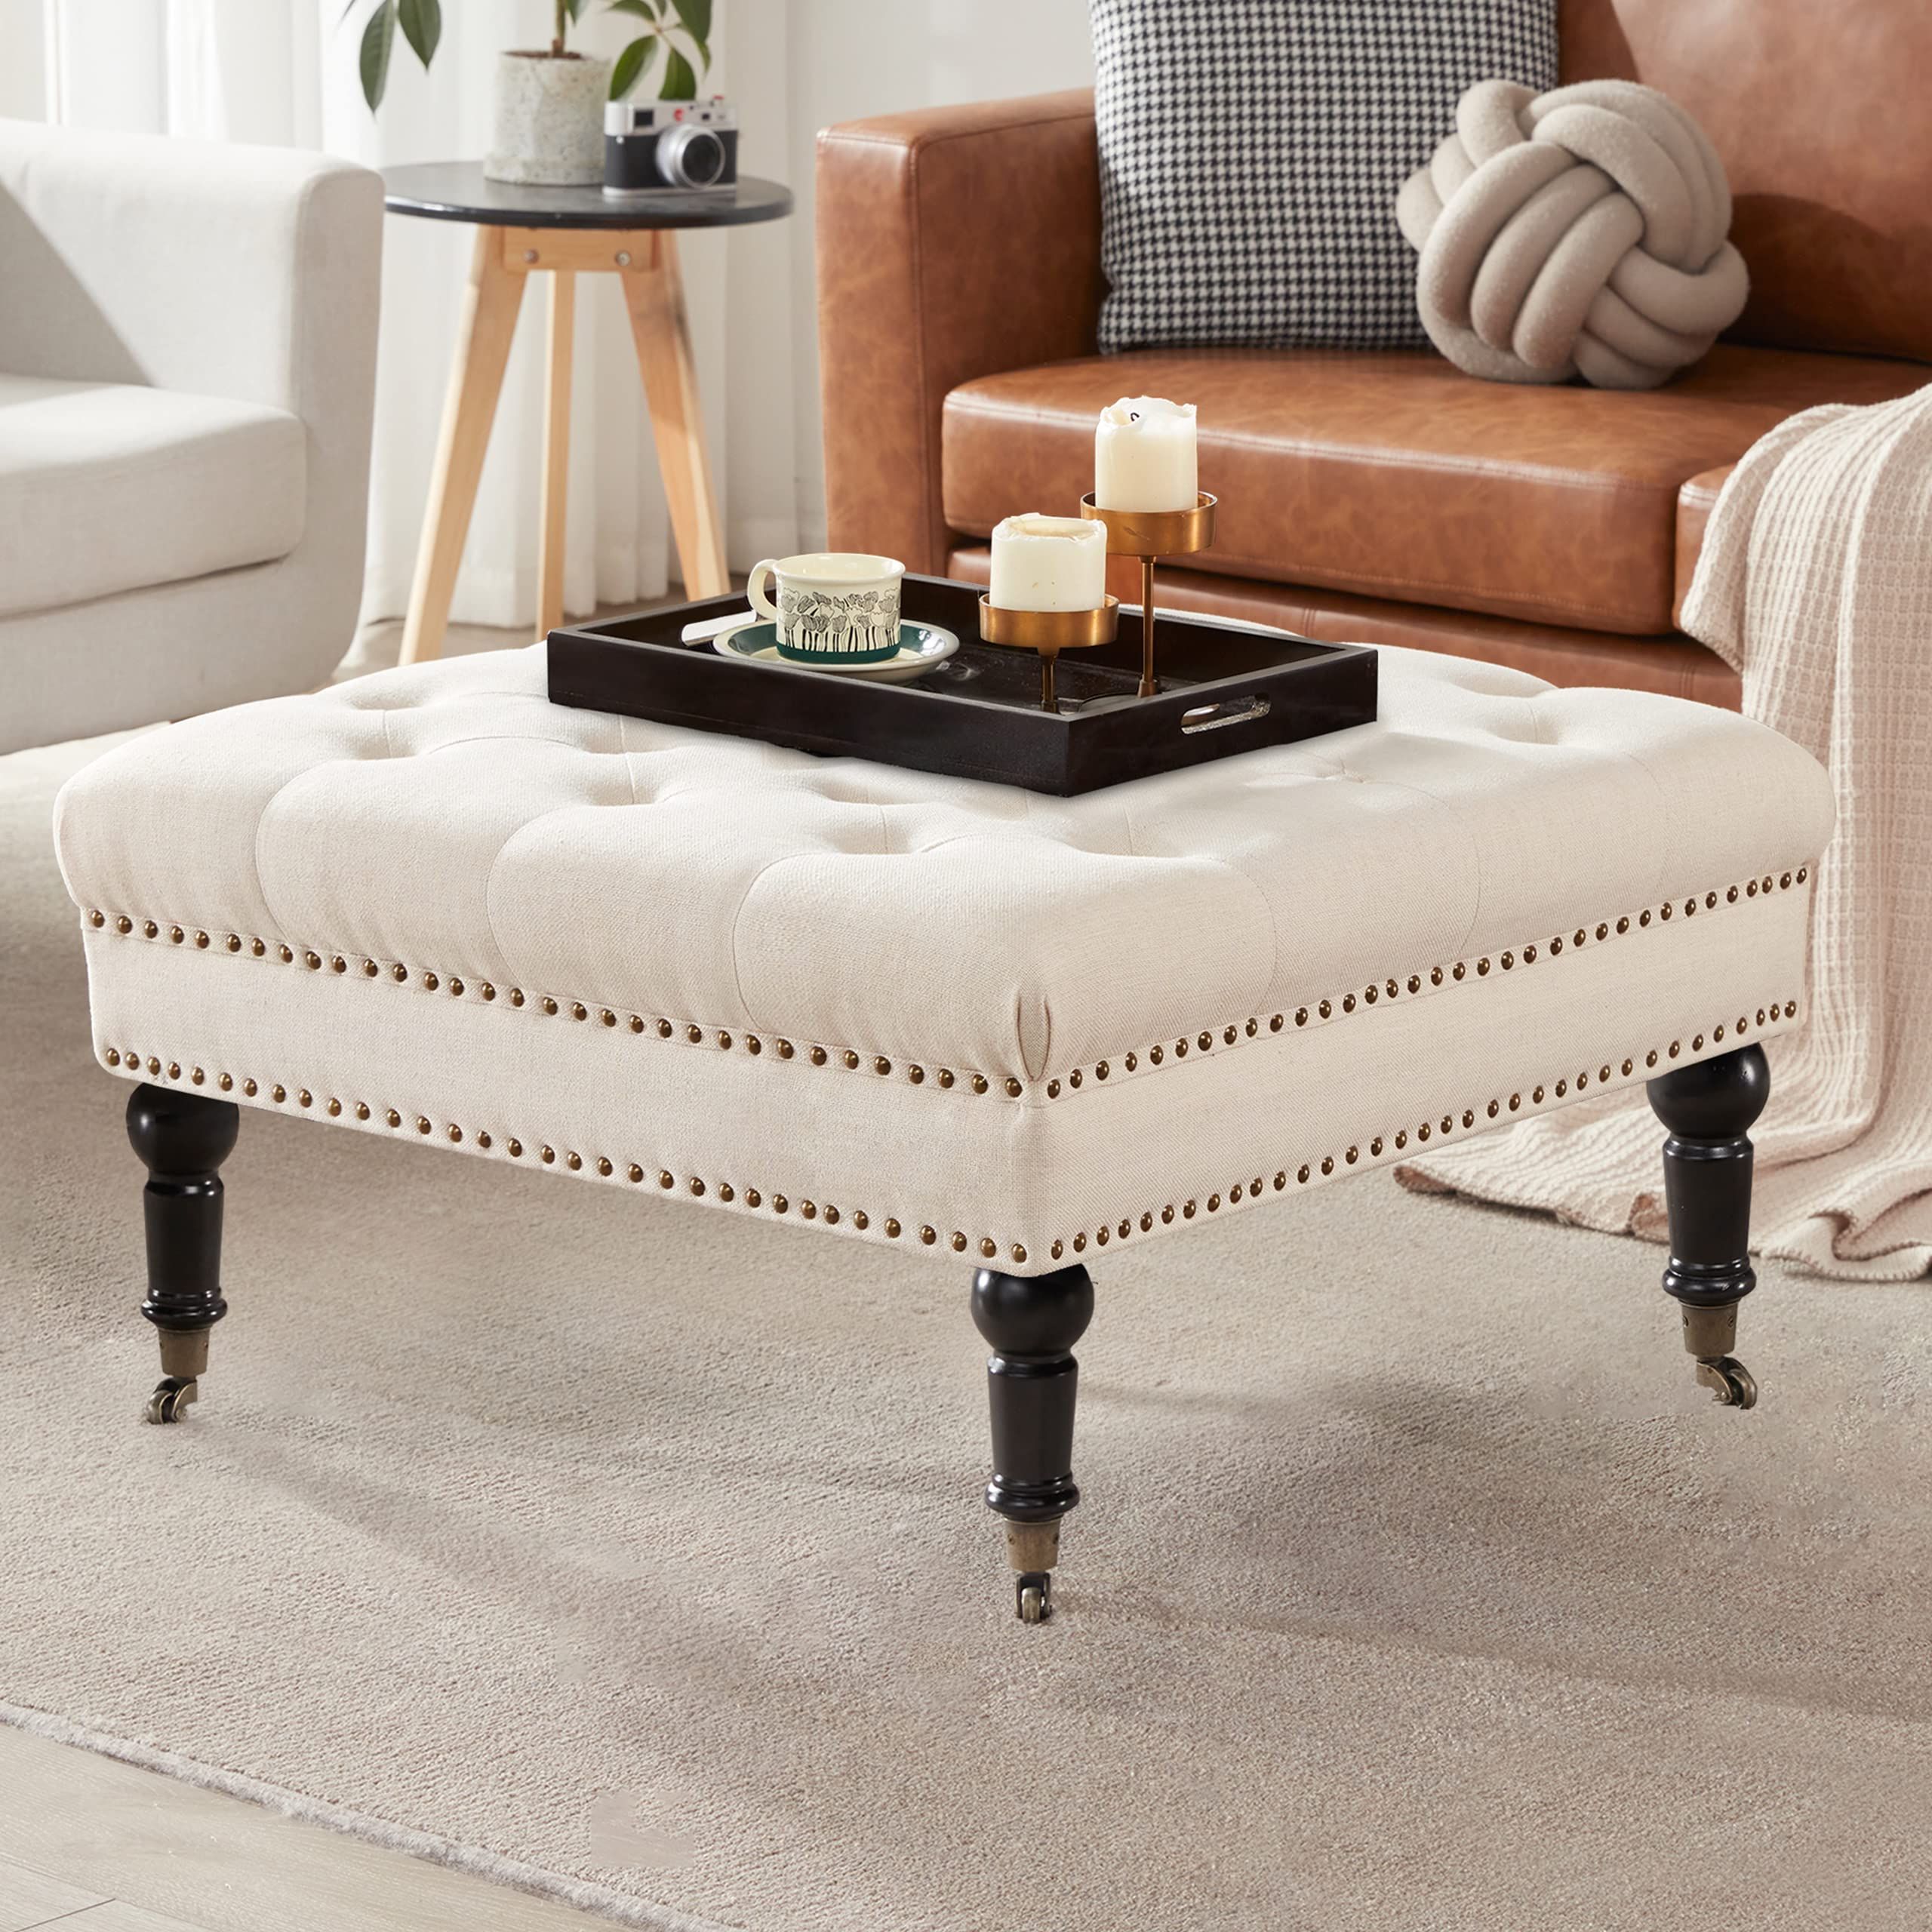 Upholstered Ottomans Within Famous Amazon: Kingfun Large Square Tufted Ottoman Coffee Table With Tray &  Casters Wheels, Oversized Linen Cocktail Ottoman Bench, Upholstered Coffee  Table Ottomans, Foot Rest Stool For Living Room(beige) : Home & Kitchen (View 6 of 10)